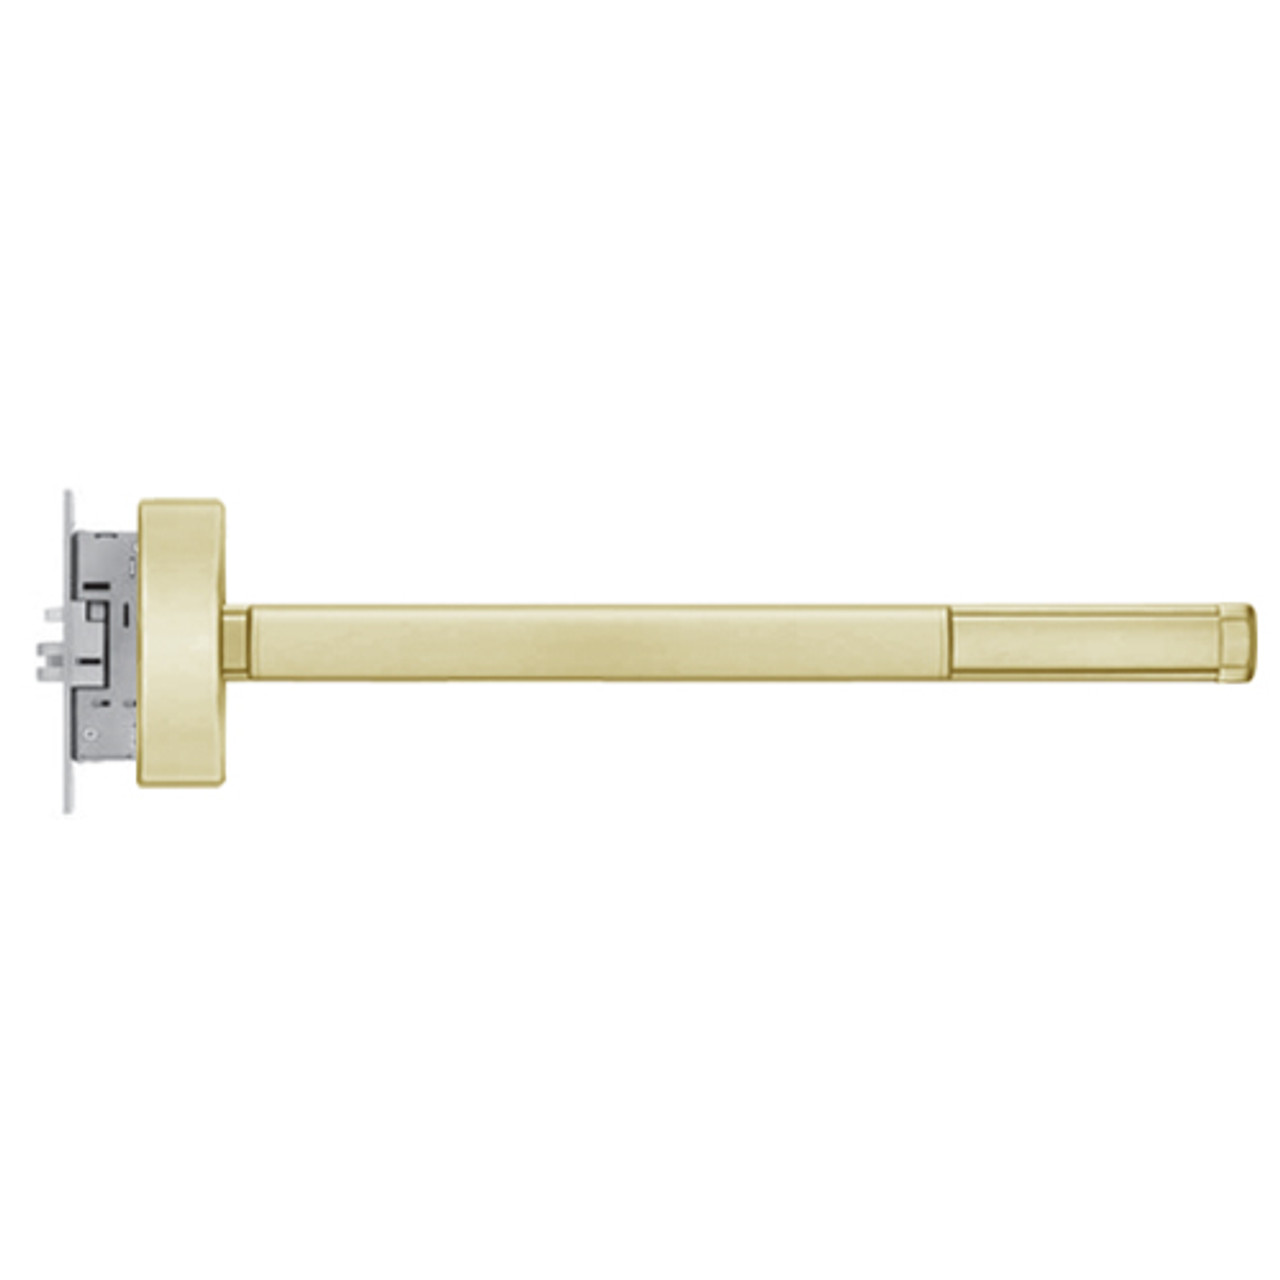 2305-LHR-606-48 PHI 2300 Series Non Fire Rated Apex Mortise Exit Device Prepped for Key Controls Thumb Piece in Satin Brass Finish